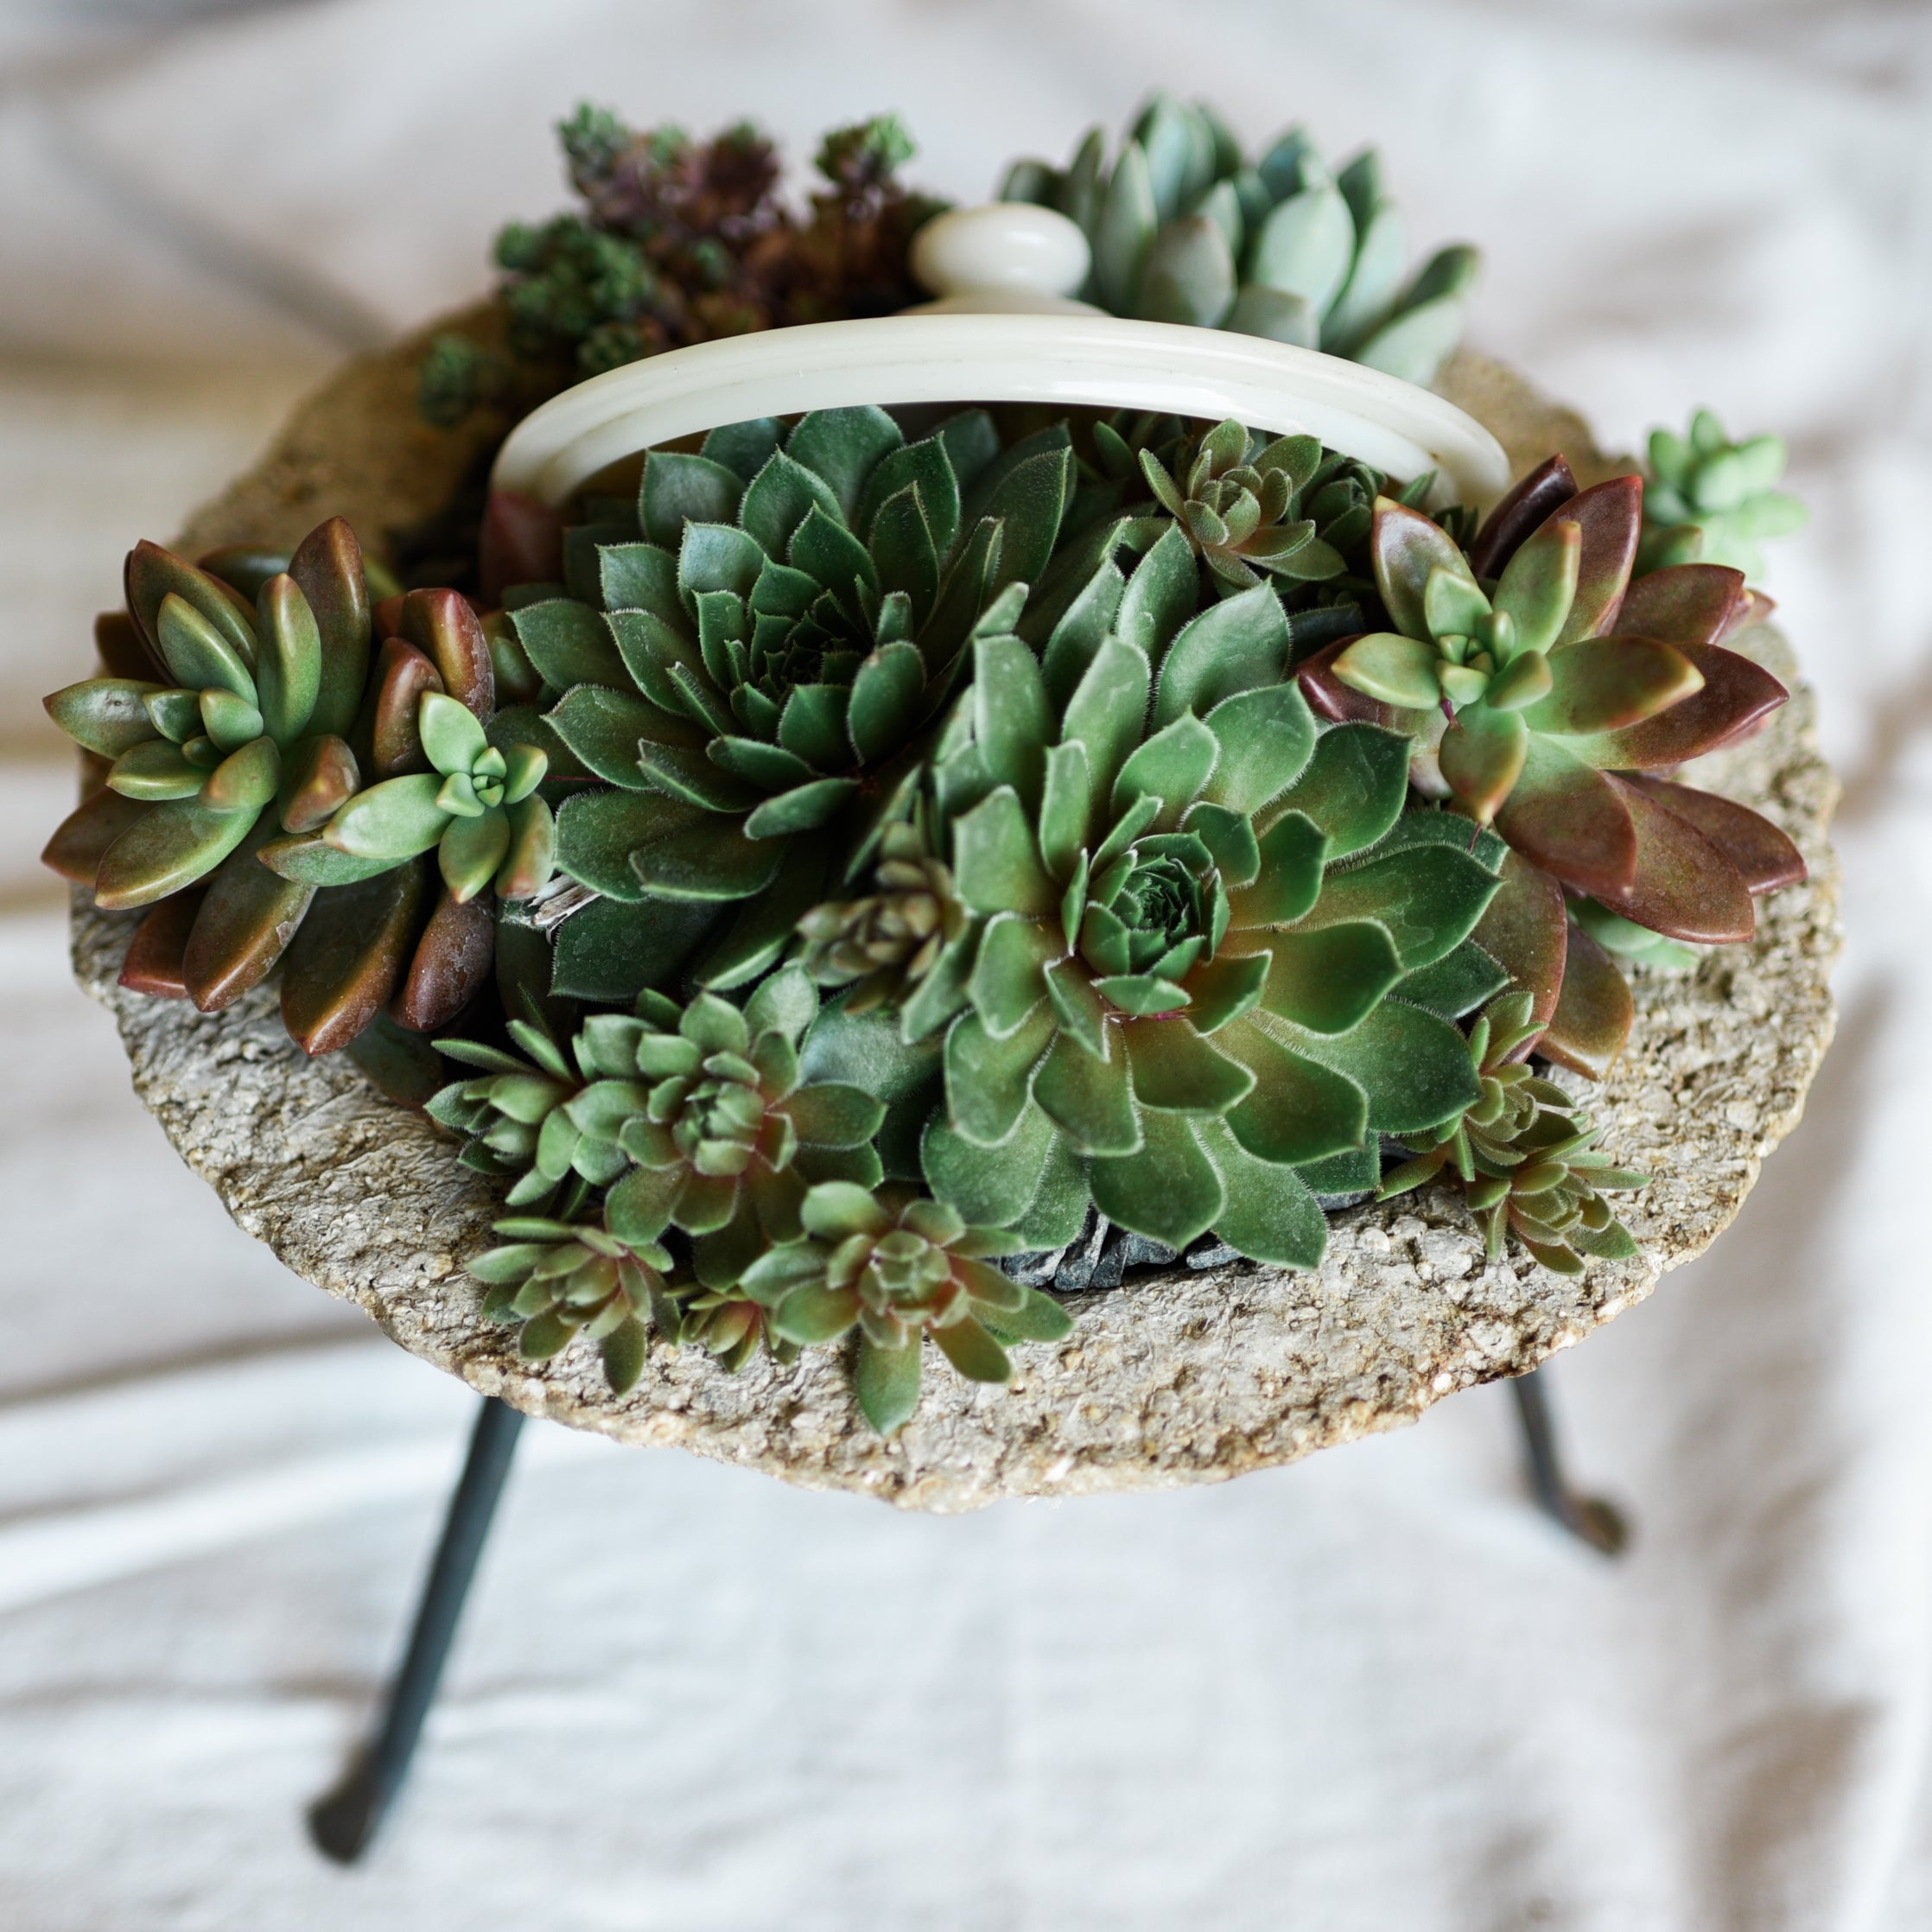 Made from our handmade lightweight Pozzola pottery. This bespoke living tablescape is a modern organic shape, a round cone that sits in a metal stand, it makes a beautiful center piece on any table, it’s a pale grey color with the feel and texture of stone. Each unique piece uses locally sourced drought tolerant succulents. This modern planter makes it easy to create a sustainable garden inside and out, it’s plant care made easy, drought tolerant living arrangements that last for years.